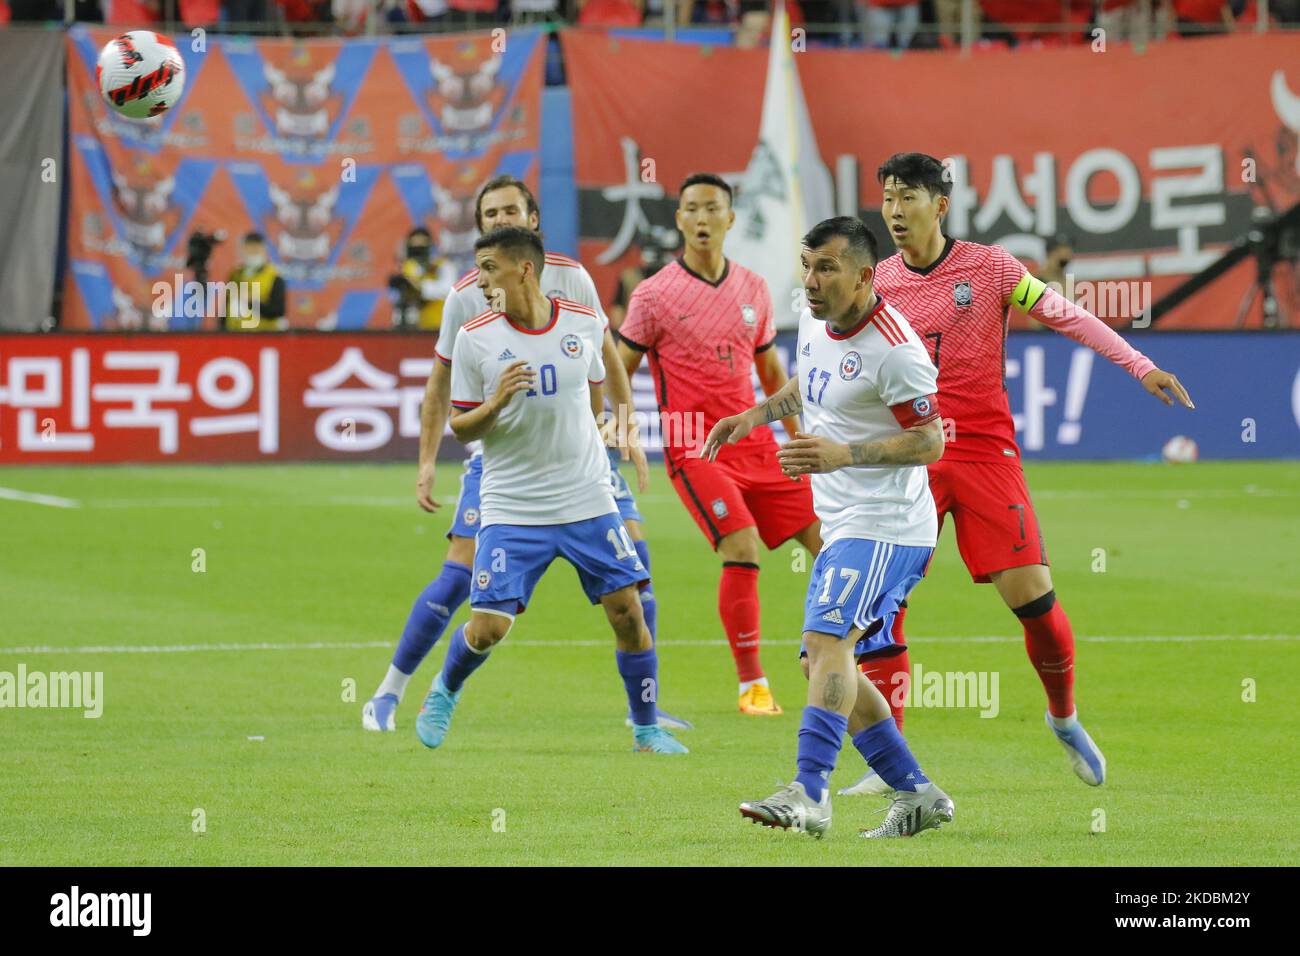 June 6, 2022-Daejeon, South Korea-Son, Heungmin(R) of South Korea and Medel, Gary(Front) of Chile action during an International Friendly match between South Korea v Chile at Daejeon Worldcup Stadium in Daejeon, South Korea. (Photo by Seung-il Ryu/NurPhoto) Stock Photo